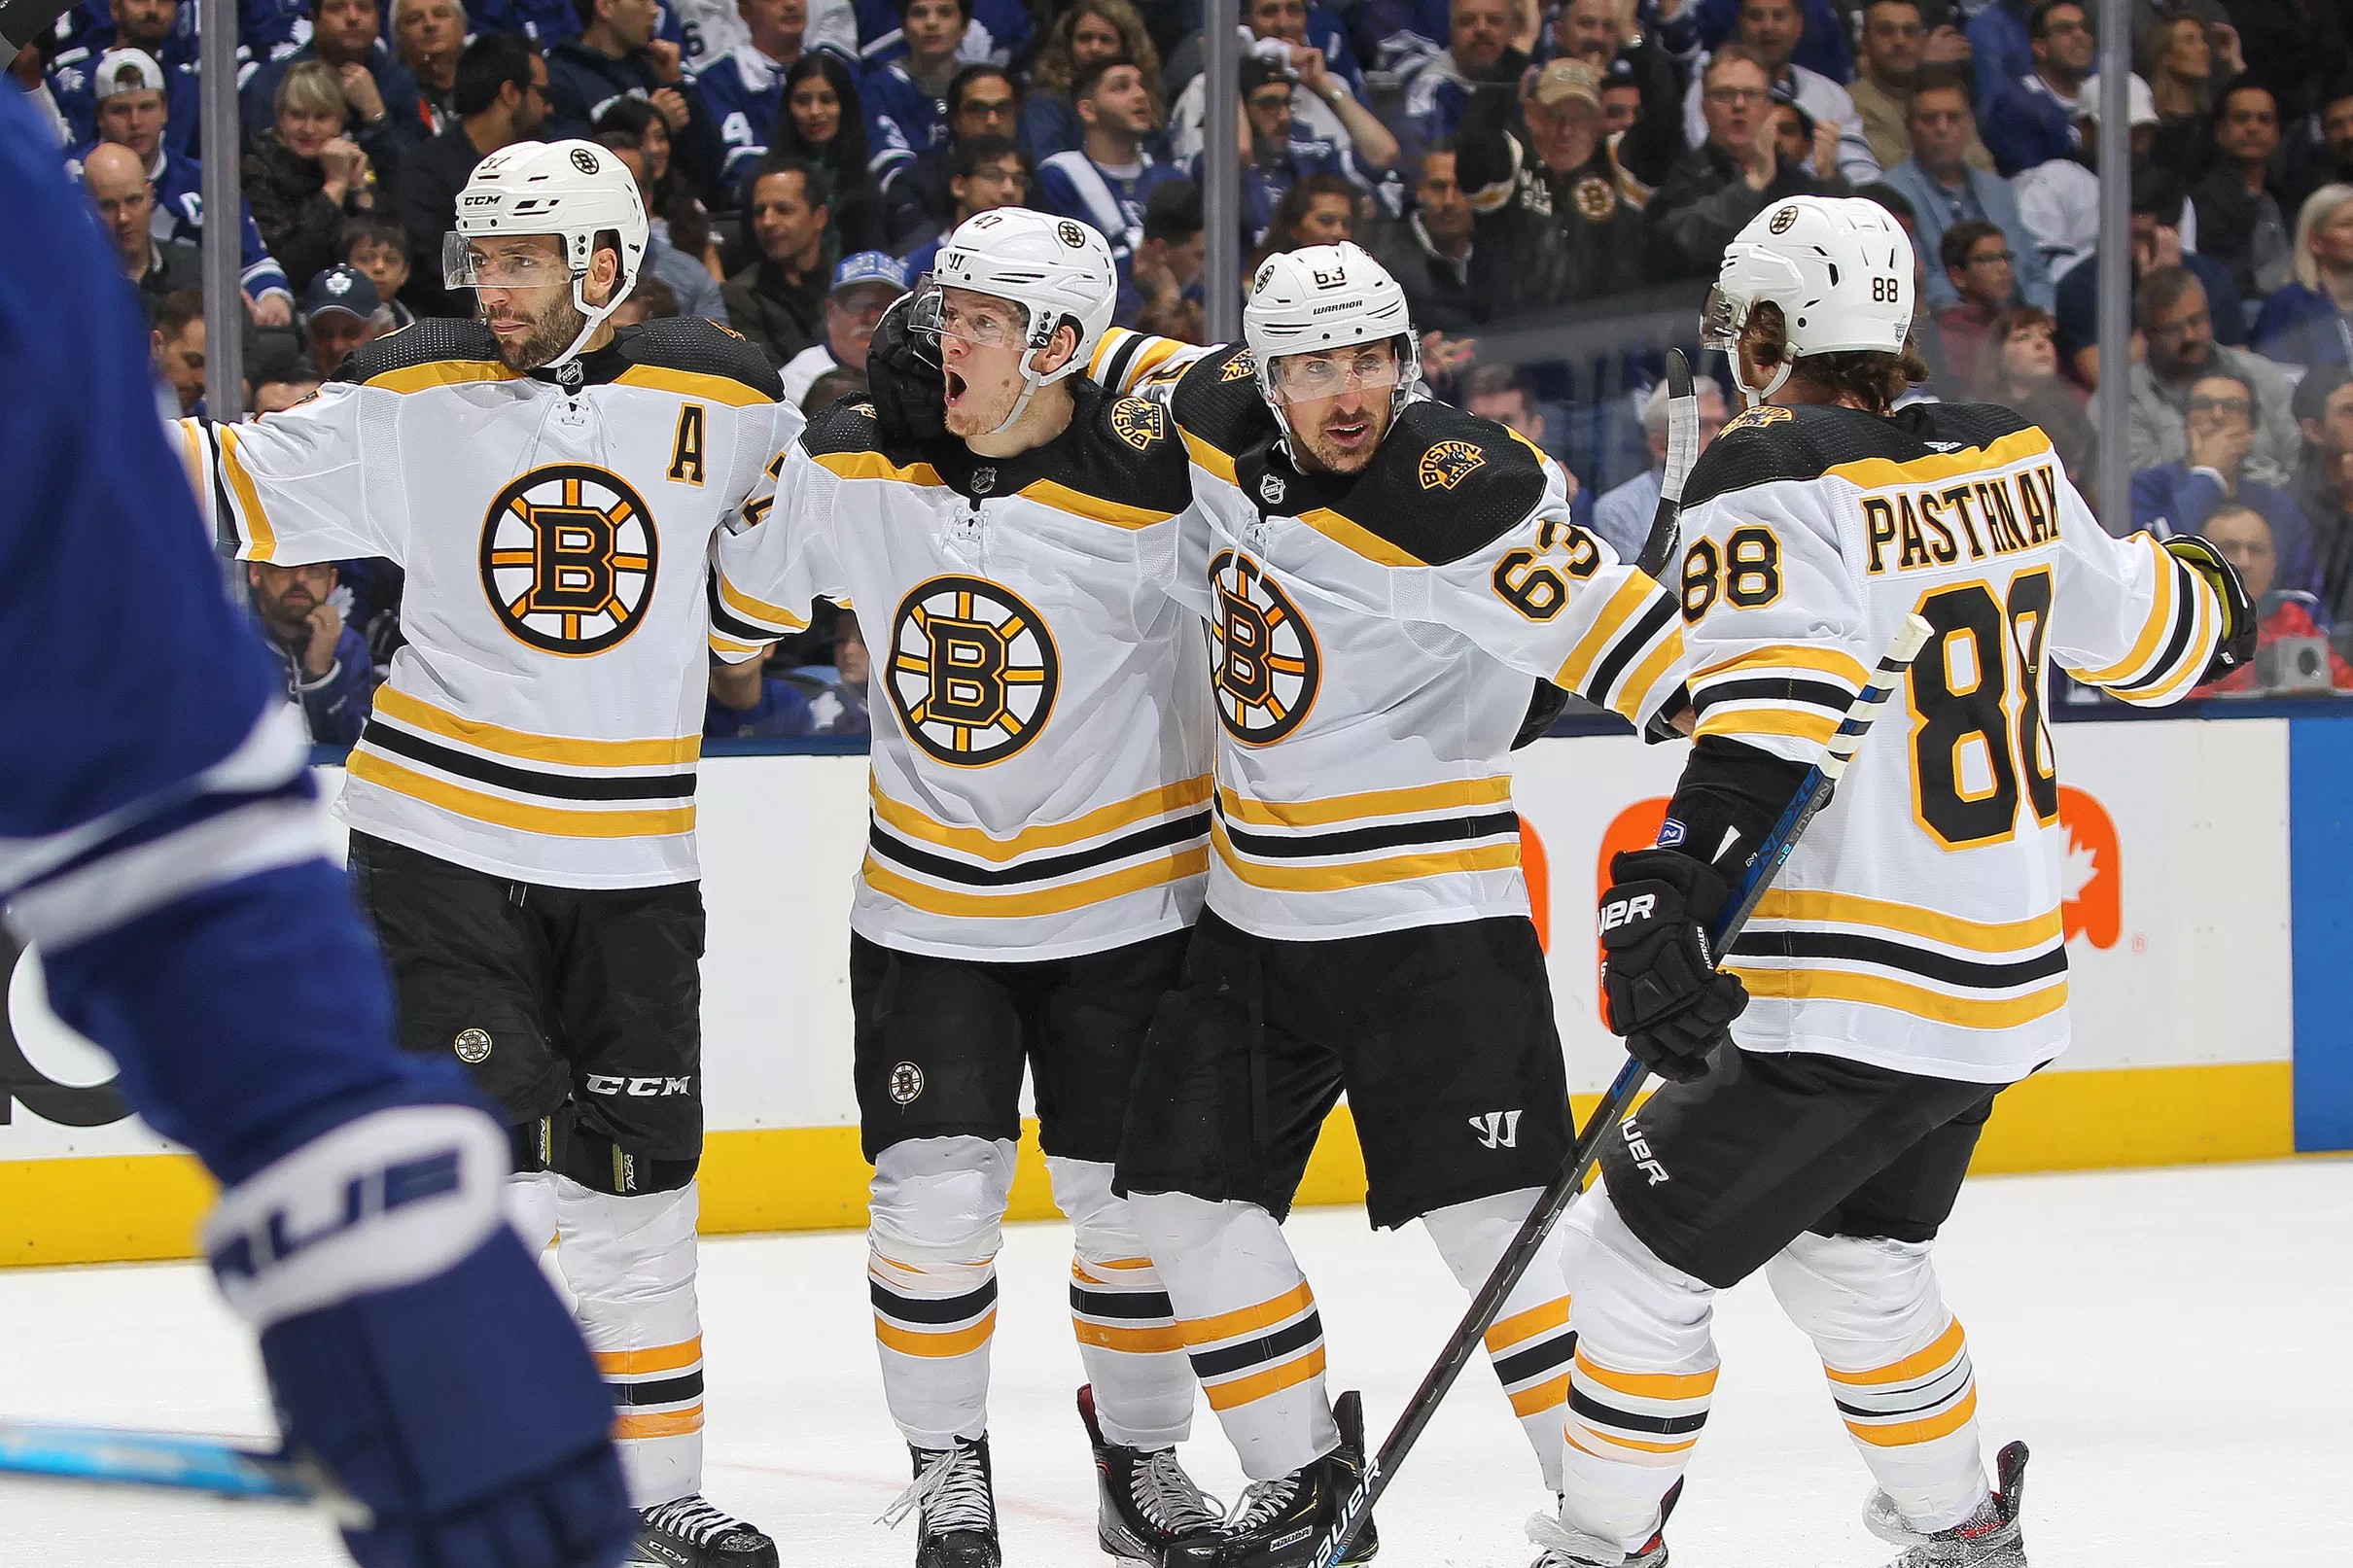 Recap Bruins play a complete game, hold on late to force a Game 7